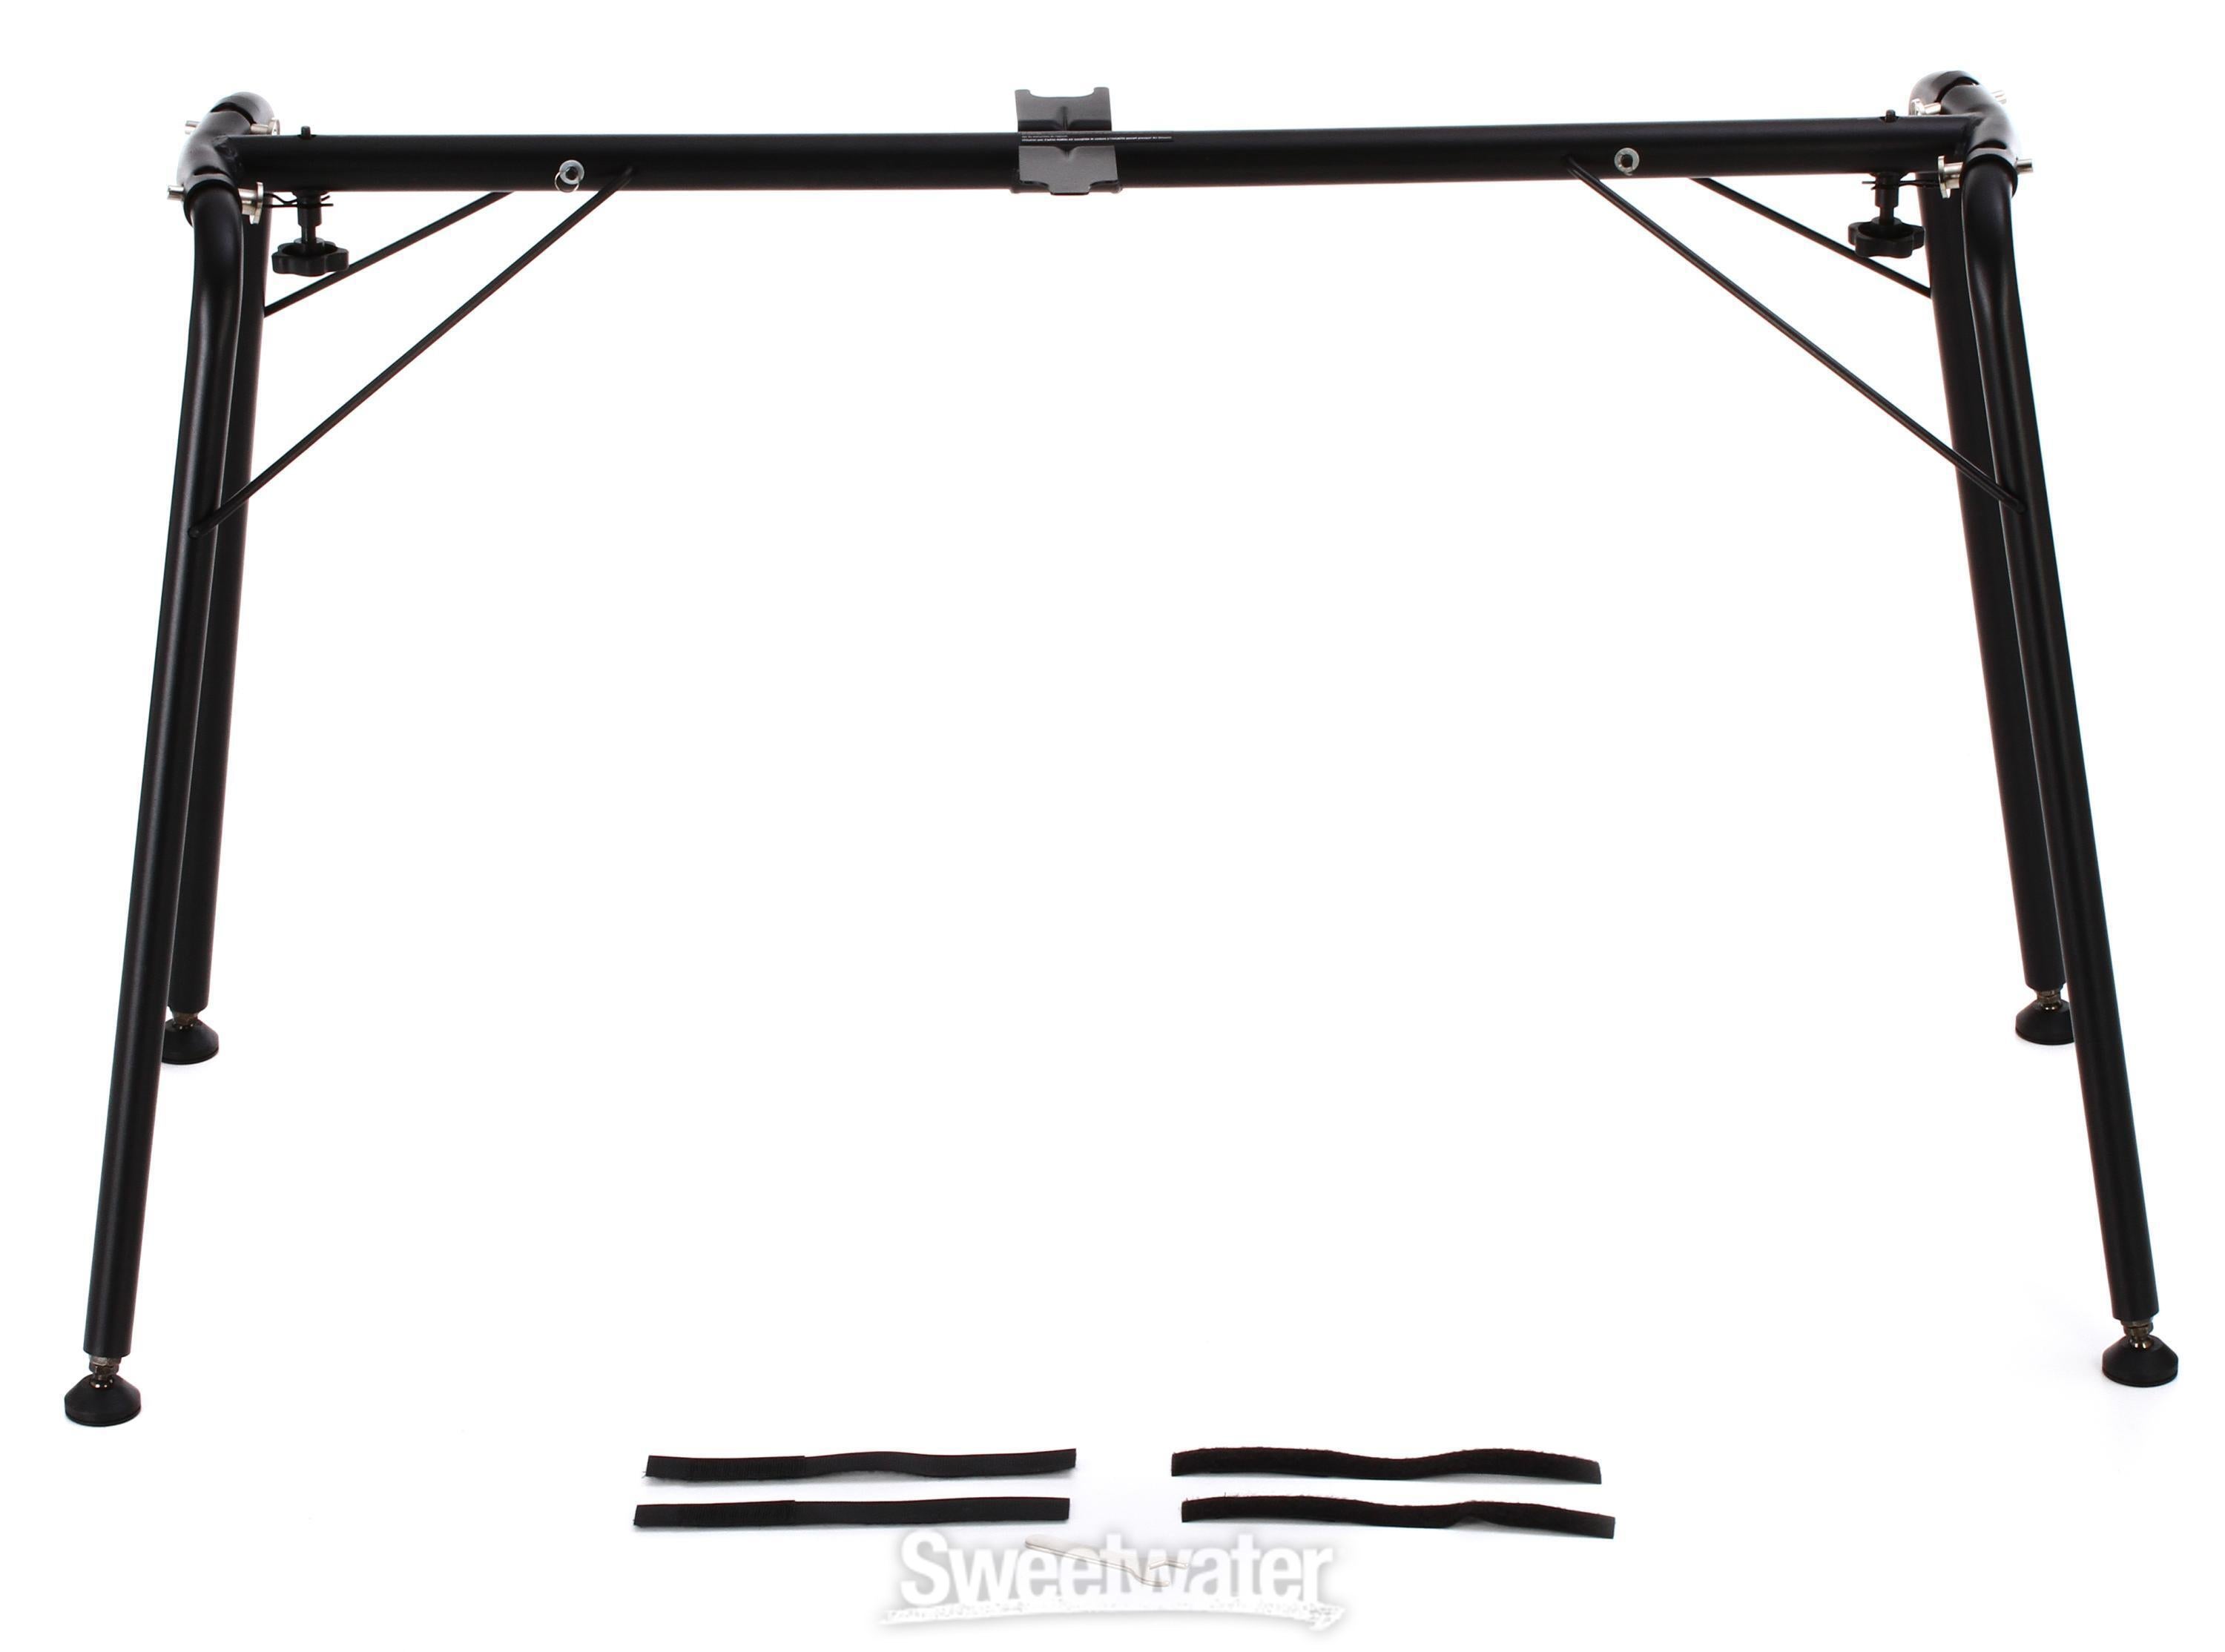 Korg ST-SV1 Vintage Style Keyboard Stand Reviews | Sweetwater